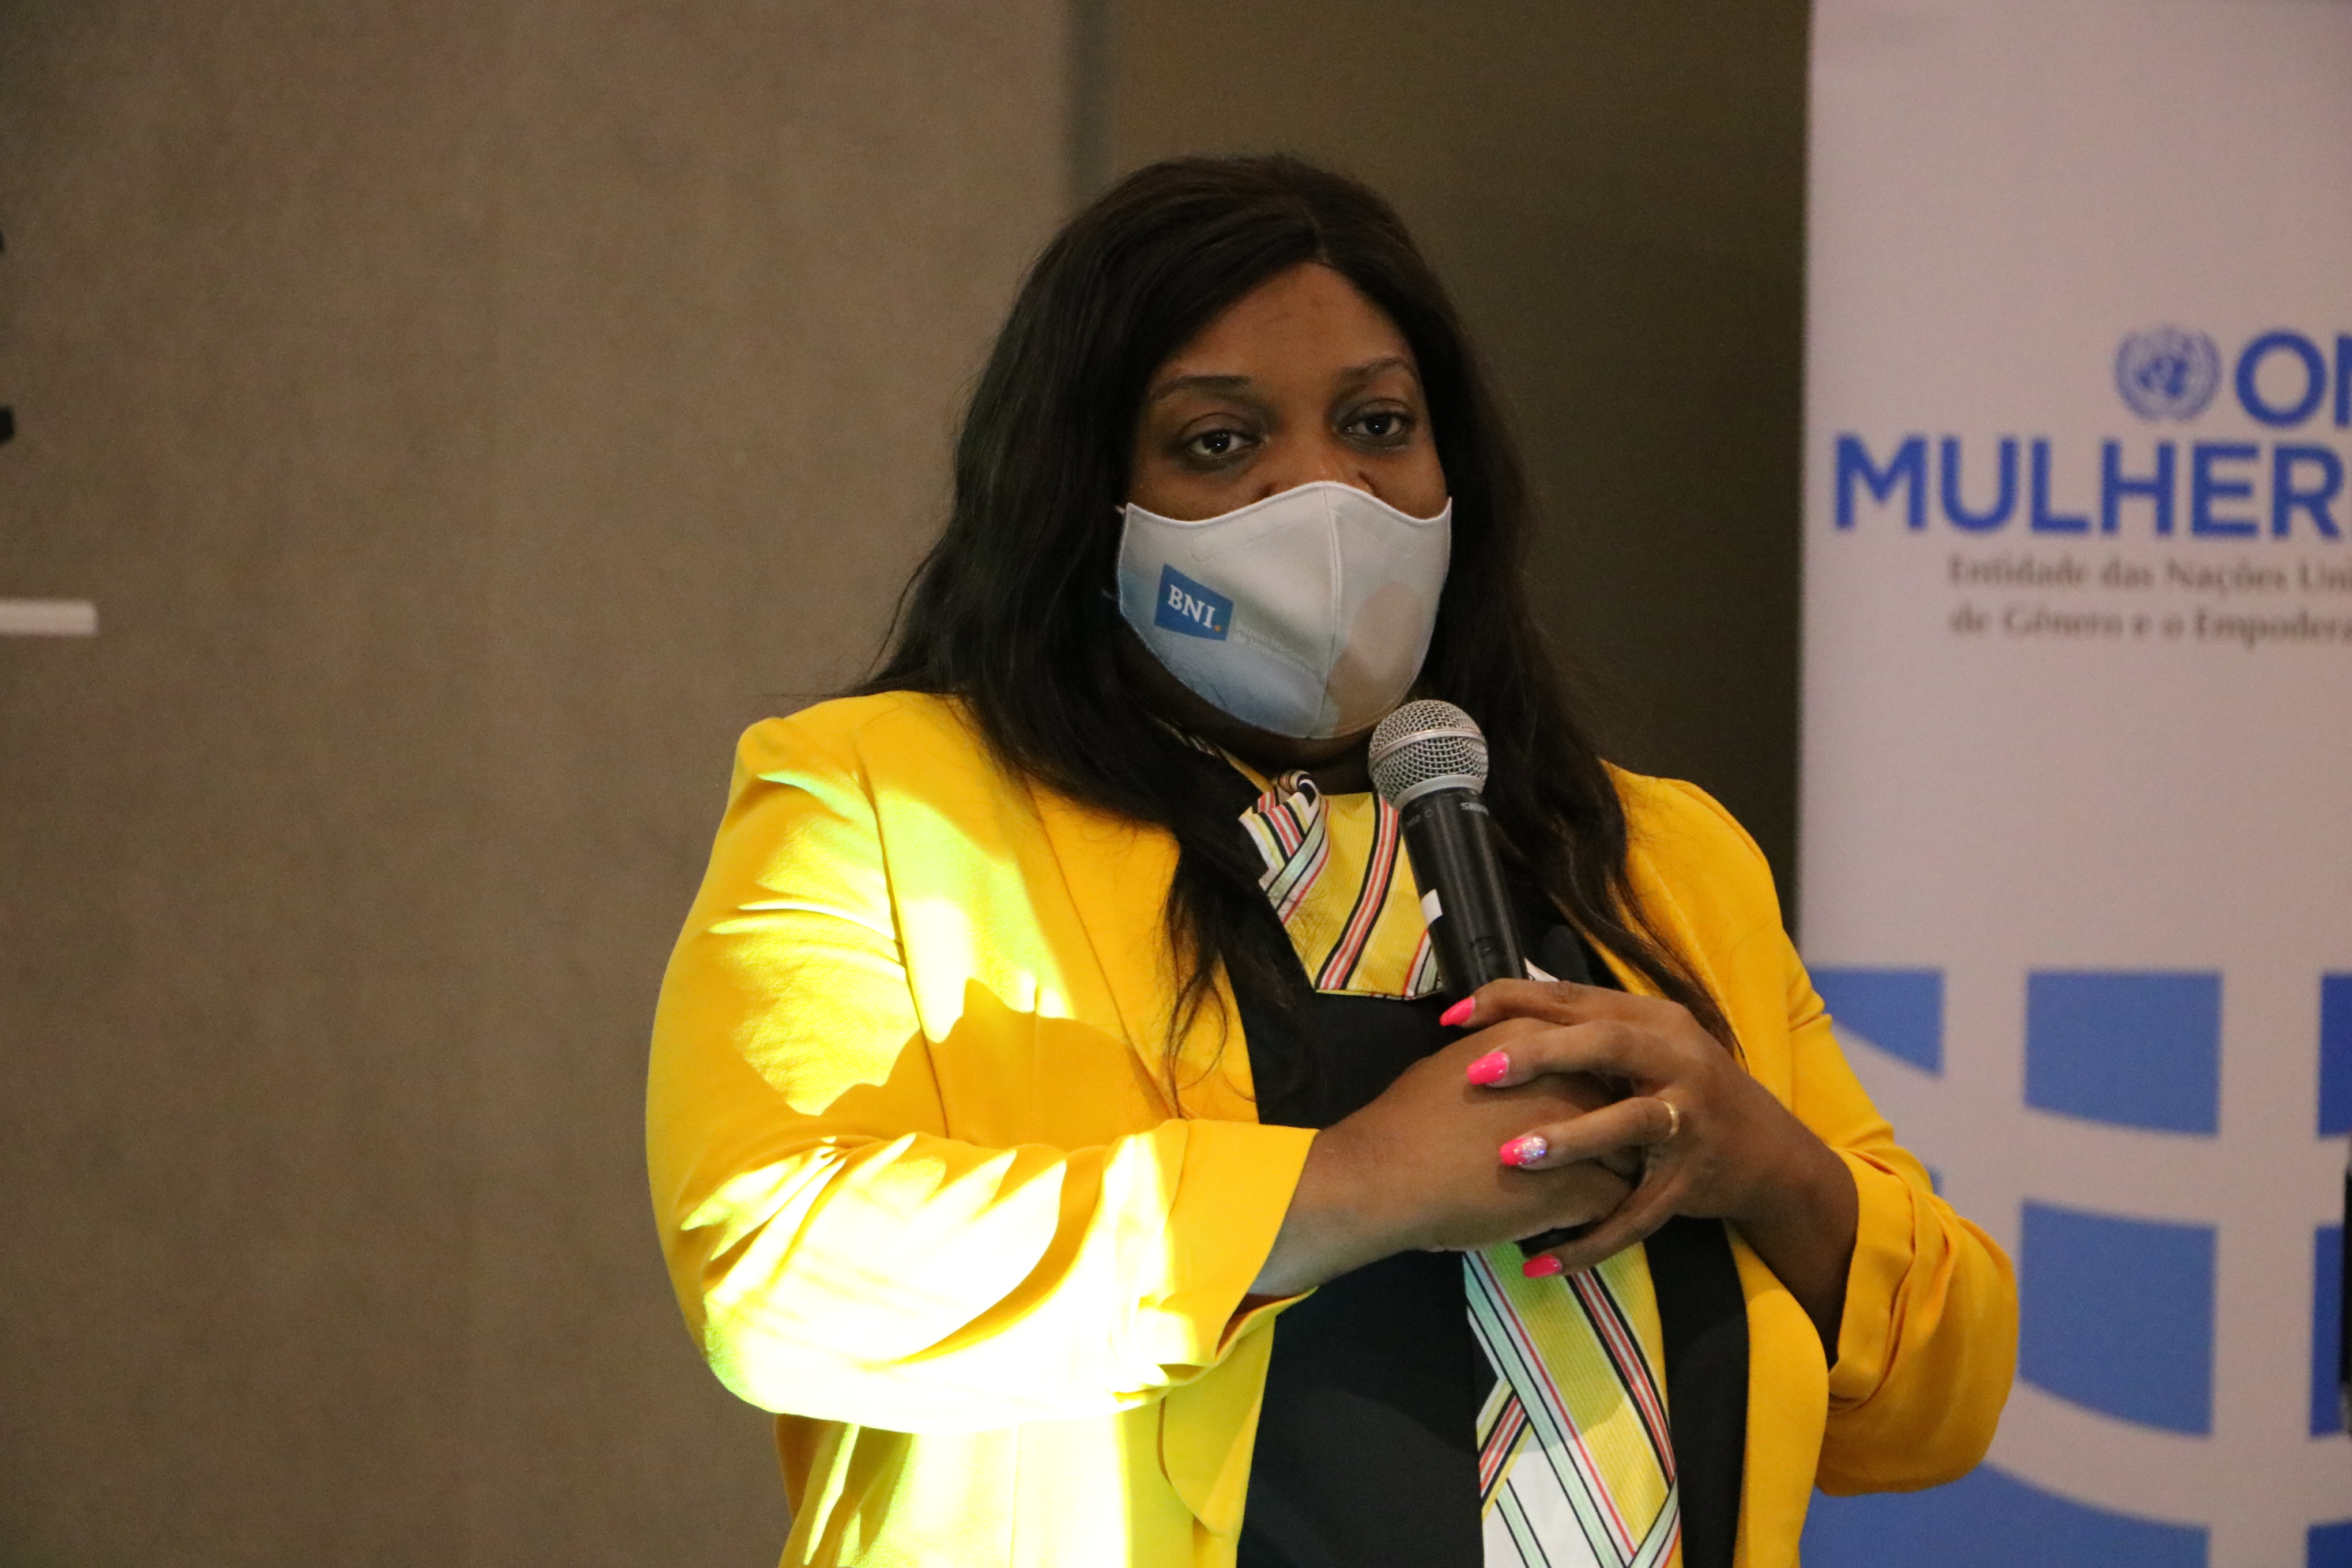 Image 3: Ancha Omar (Representing the National Investment Bank), reflects on the financial impacts of the pandemic, with particular focus on the Government-initiated COVID-19 credit lines. (C. Costa / UN Women)